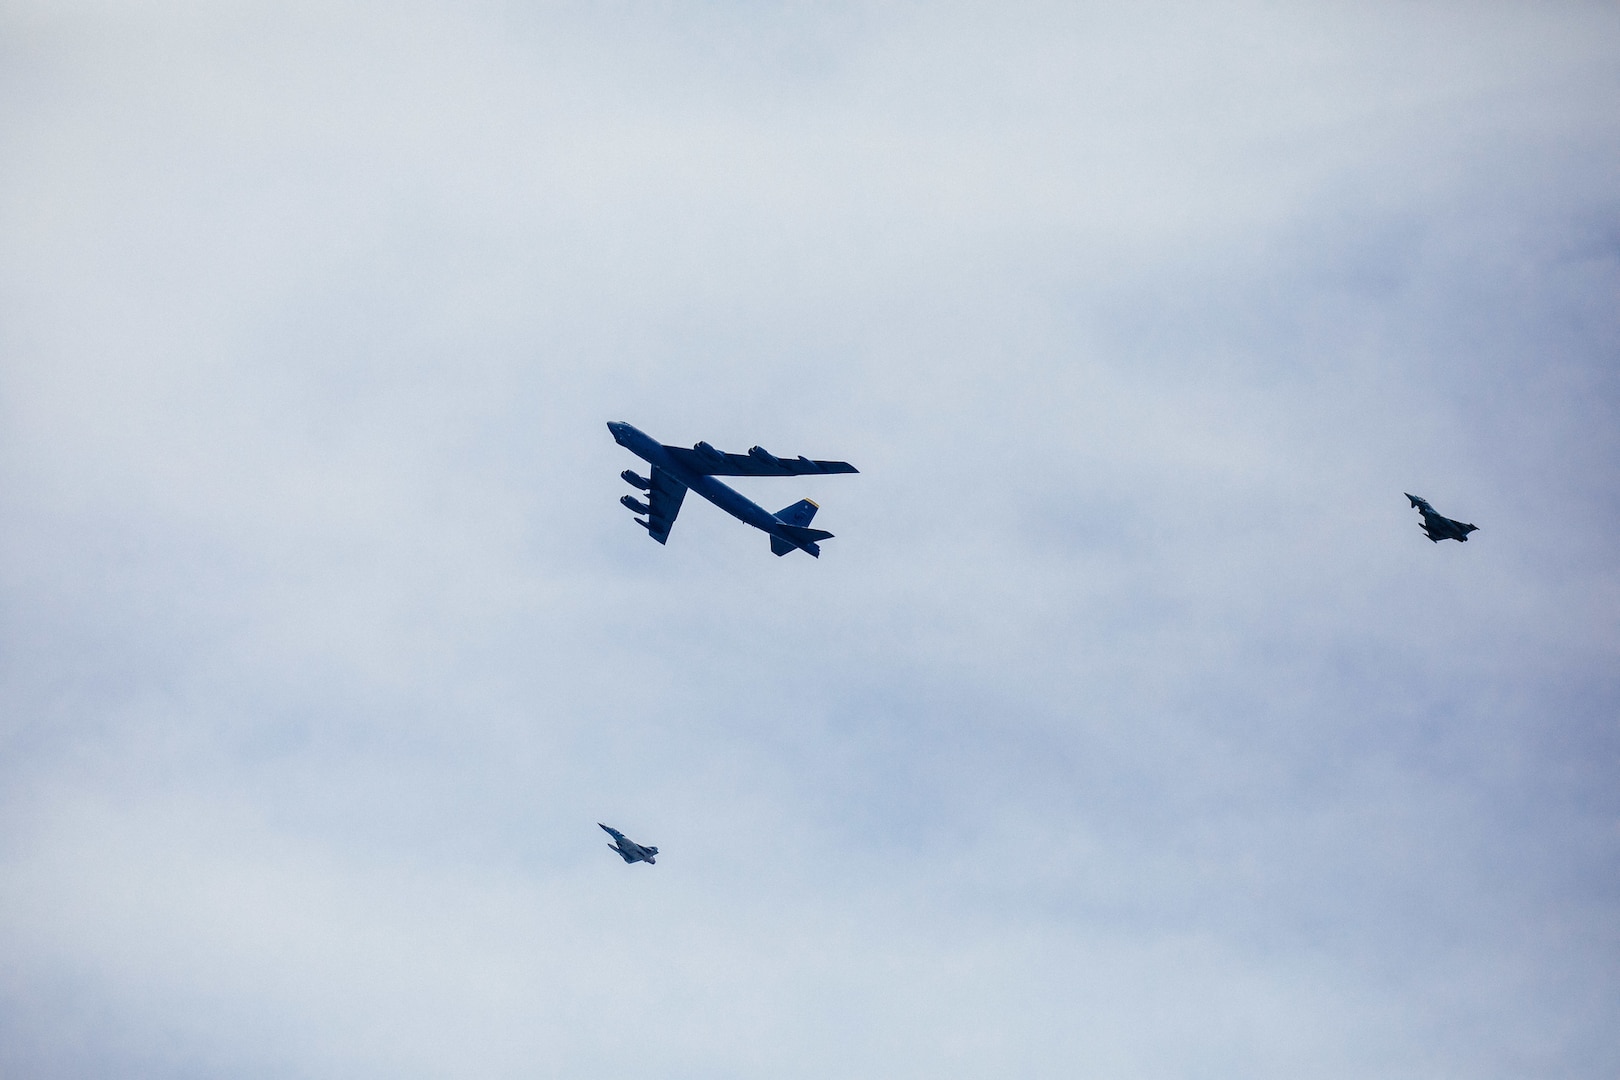 B-52s conduct interoperability training with aircraft from the Baltic Air Policing mission during a long-range, long duration strategic Bomber Task Mission throughout Europe and the Baltic region, June 15, 2020. Participation in multinational exercises enhances our professional relationships and improves overall coordination with allies and partner militaries during times of crisis.